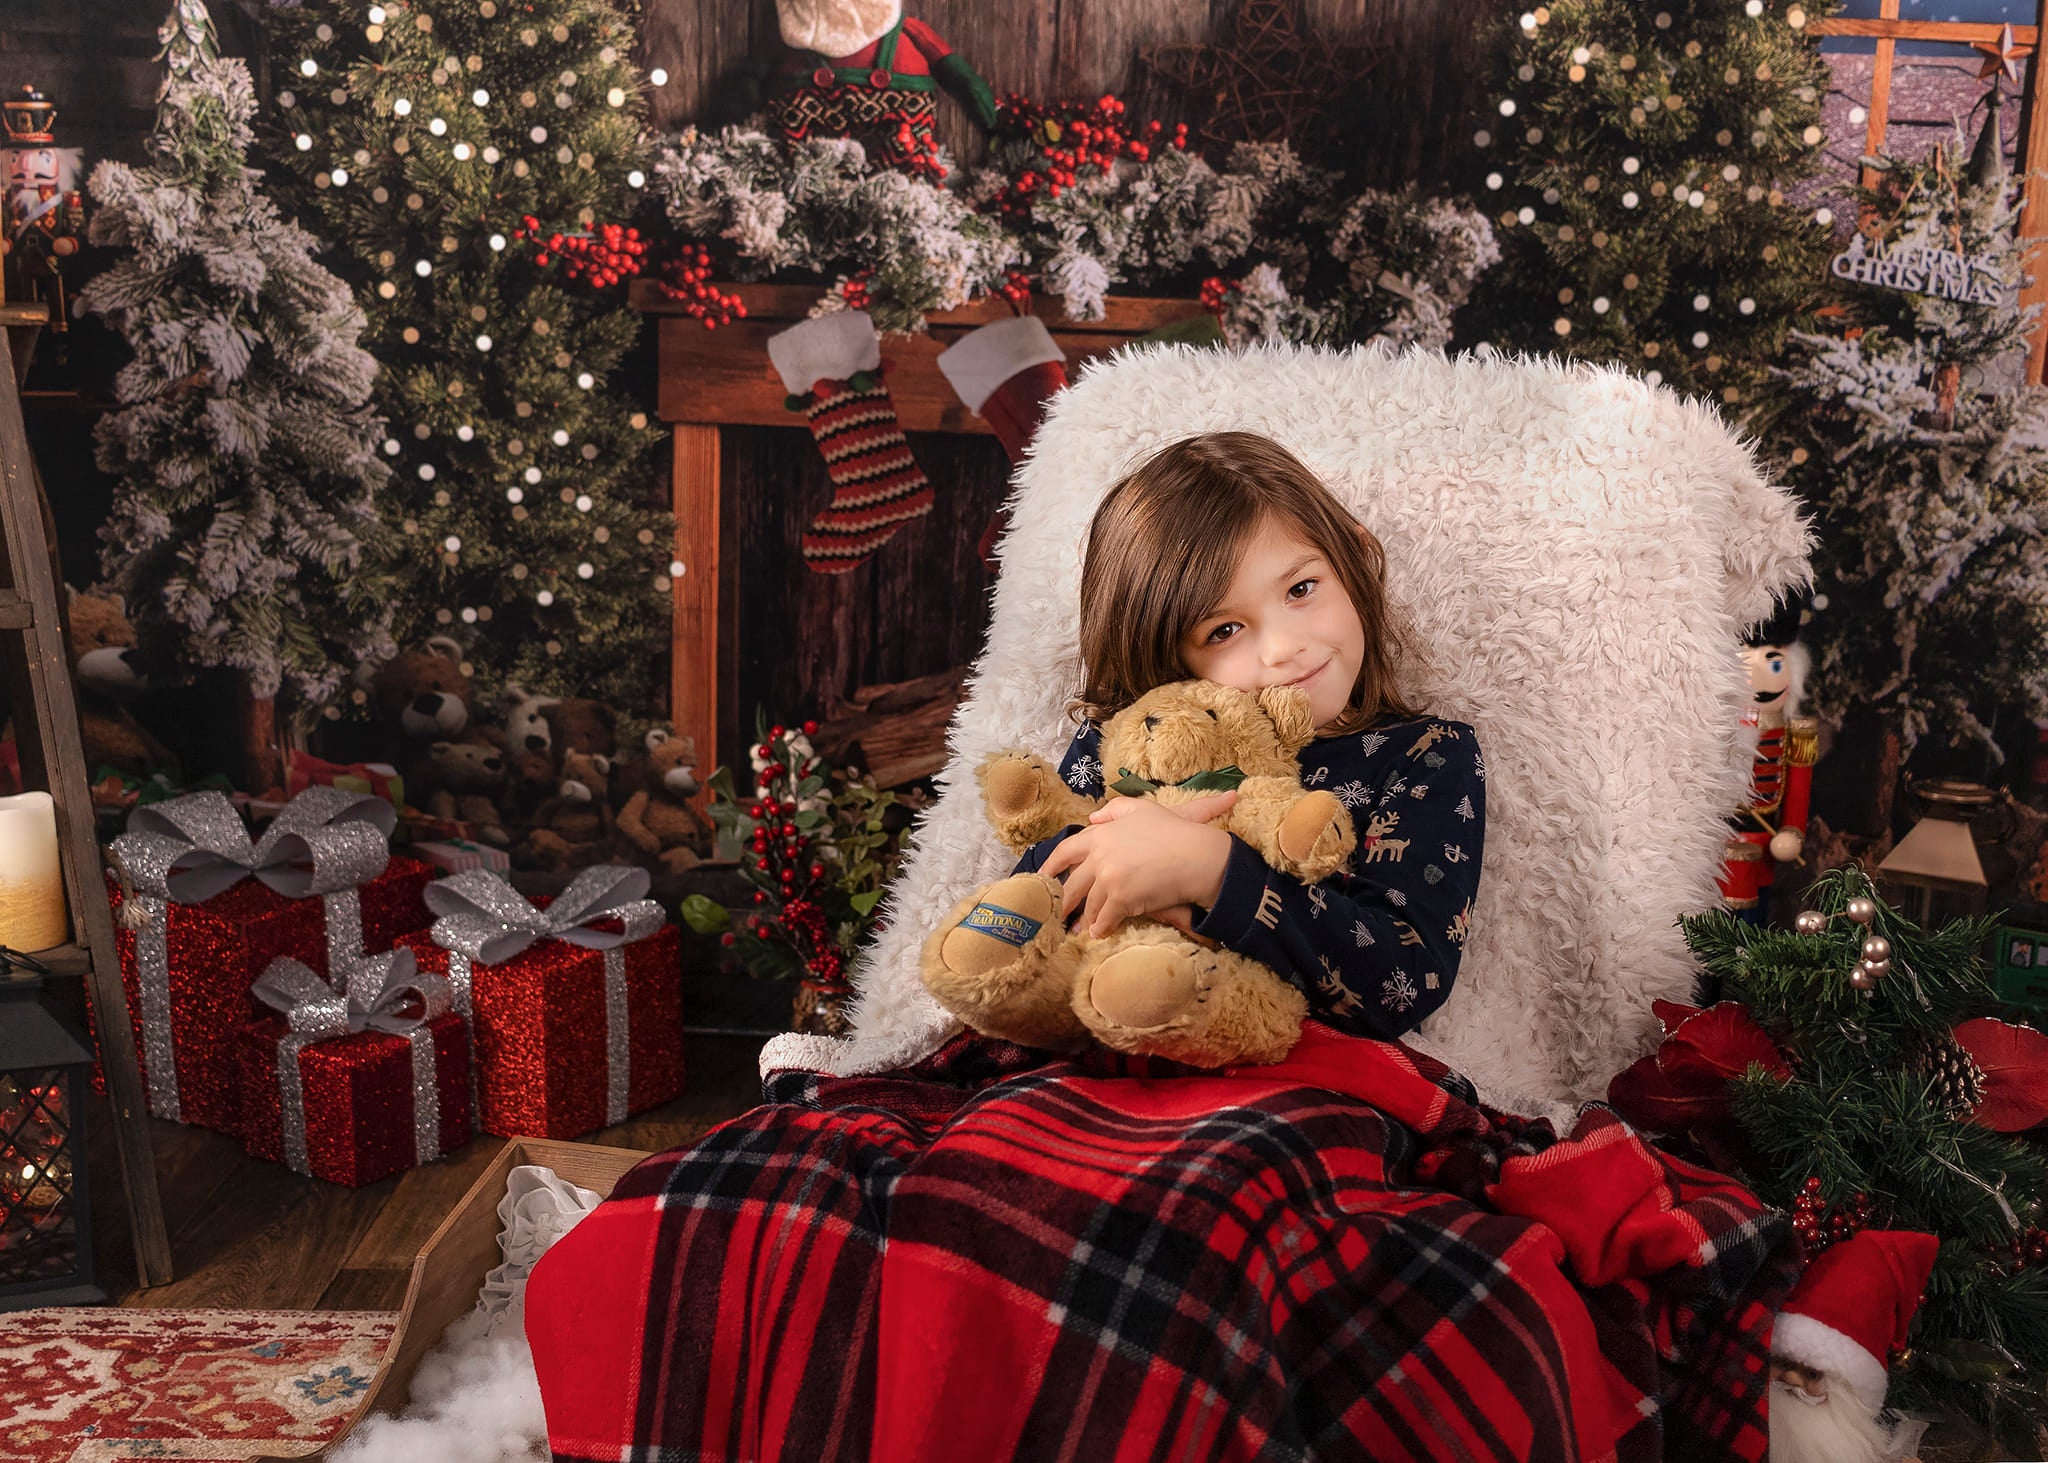 Kate Vintage Wood Backdrop Christmas Fireplace Teddy Bear for Photography